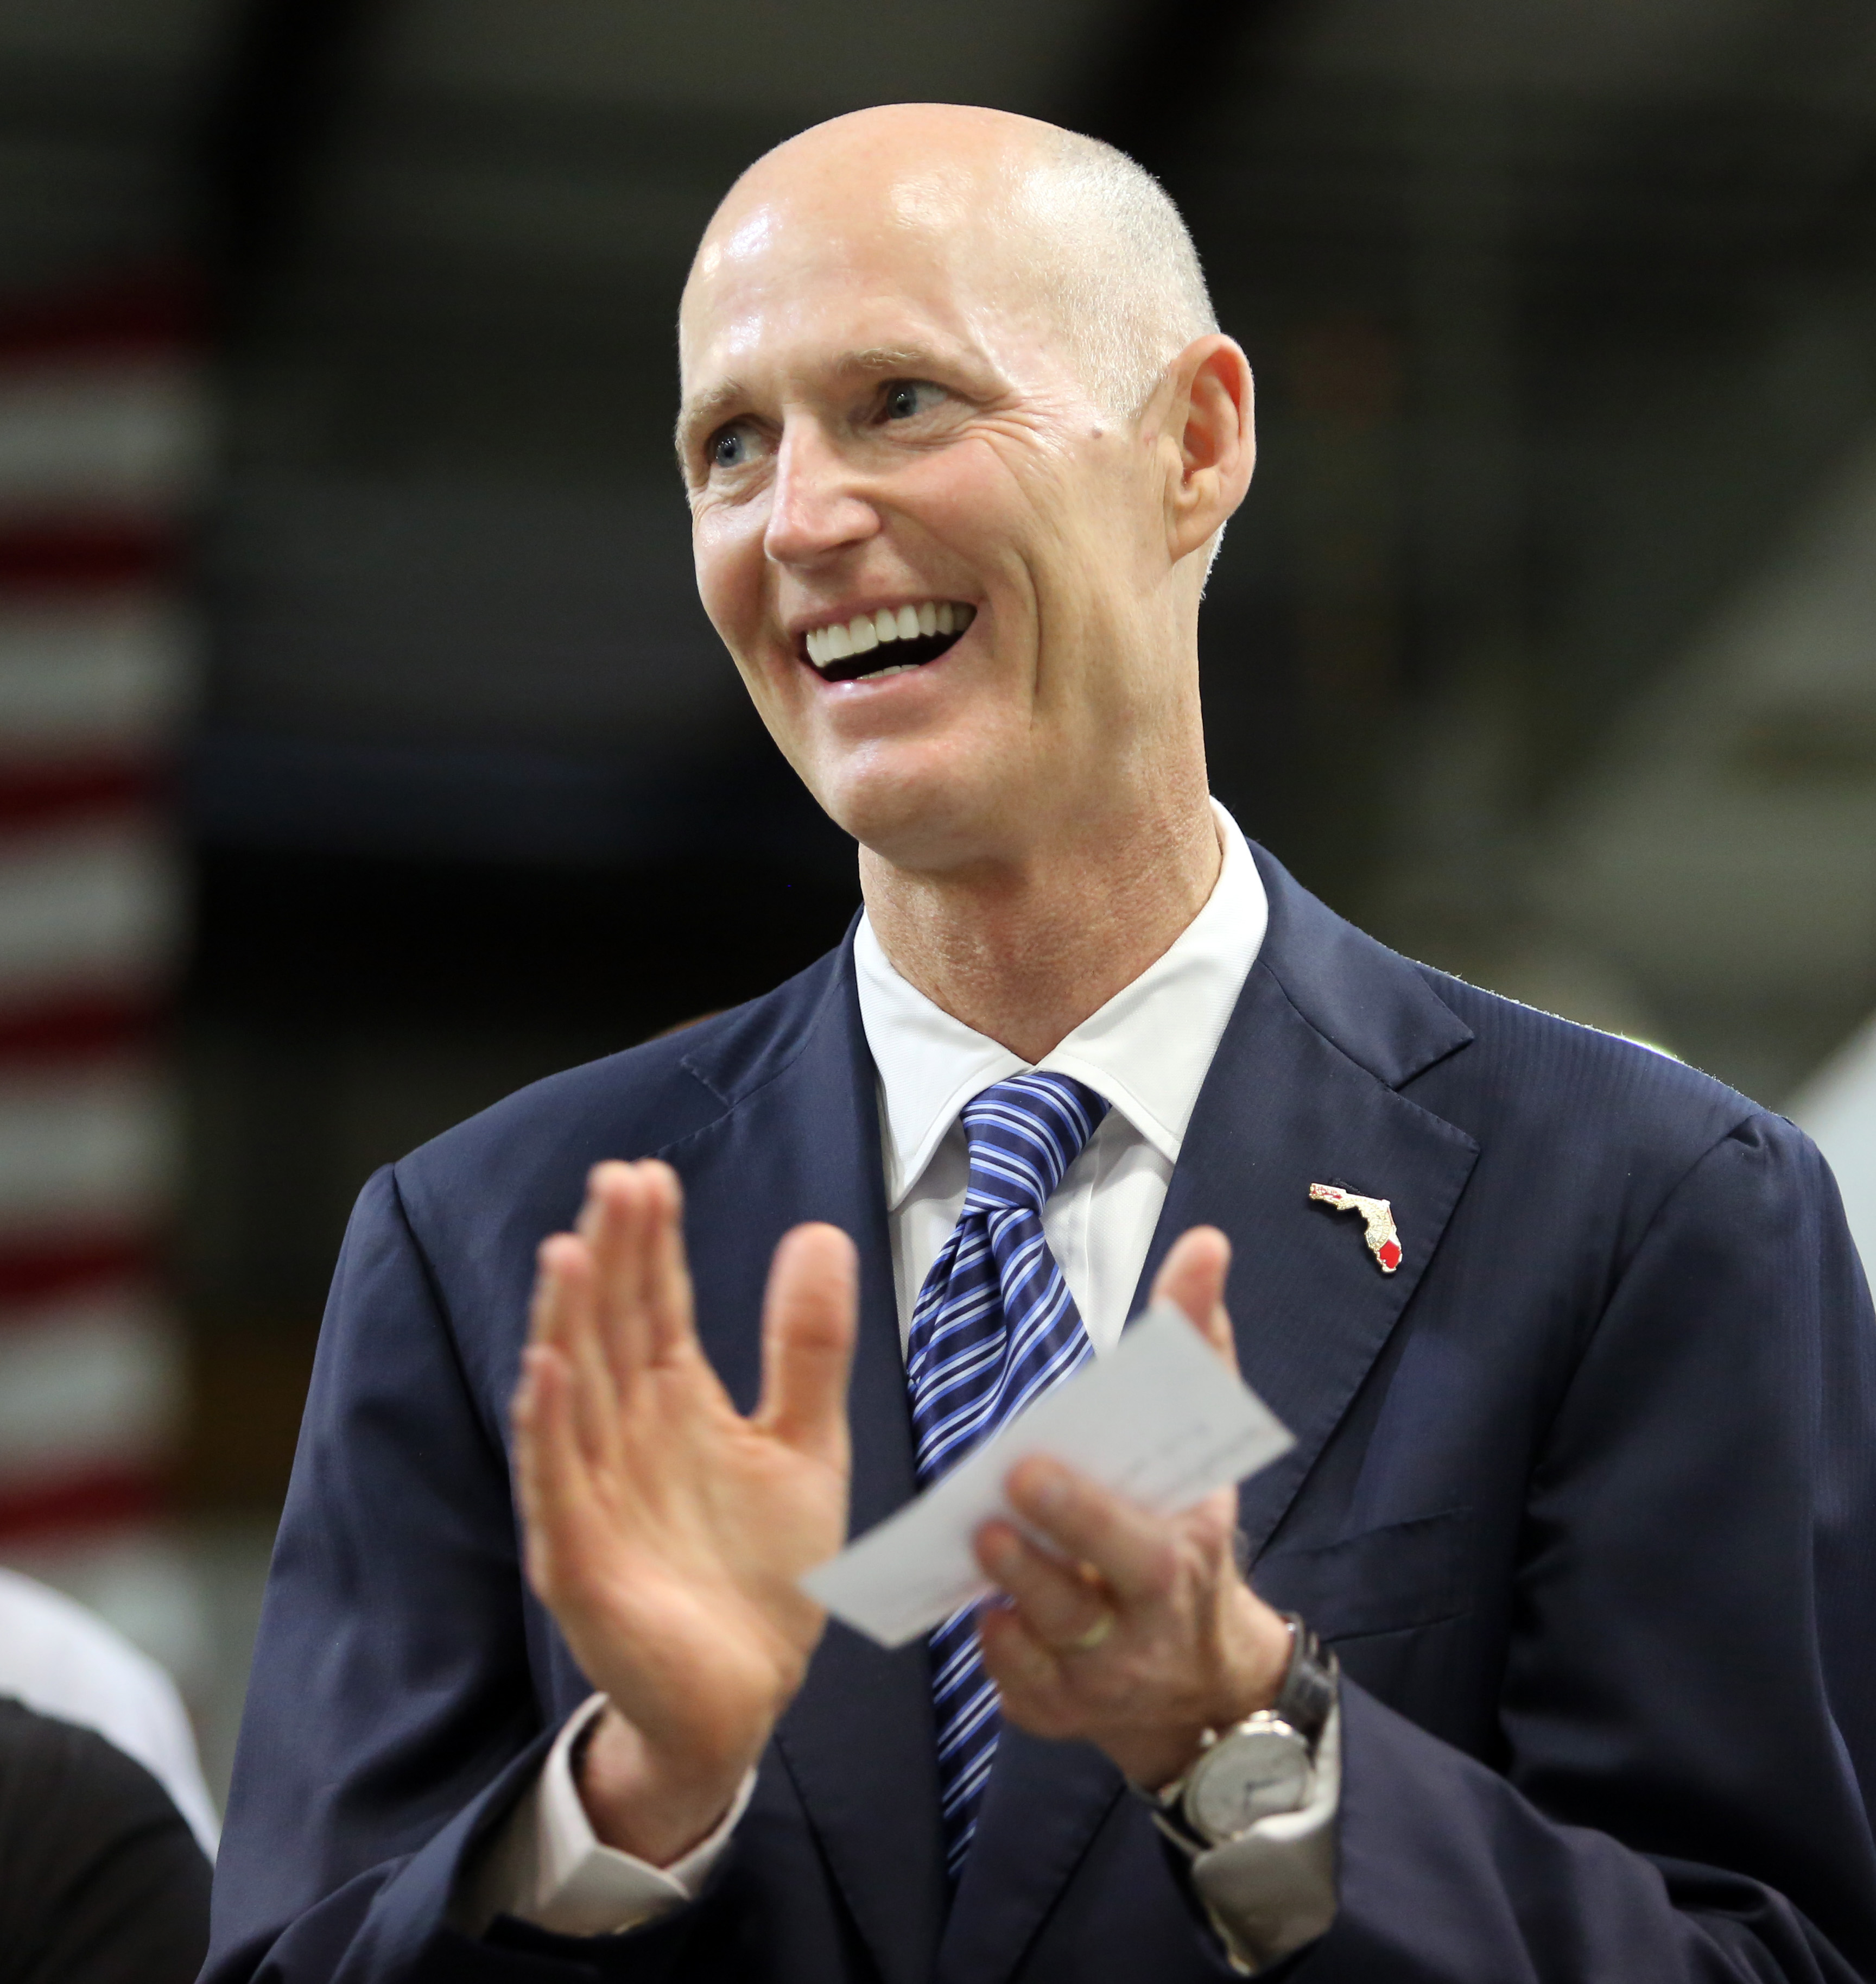 Rick Scott: Not a scientist—and darn proud to say it